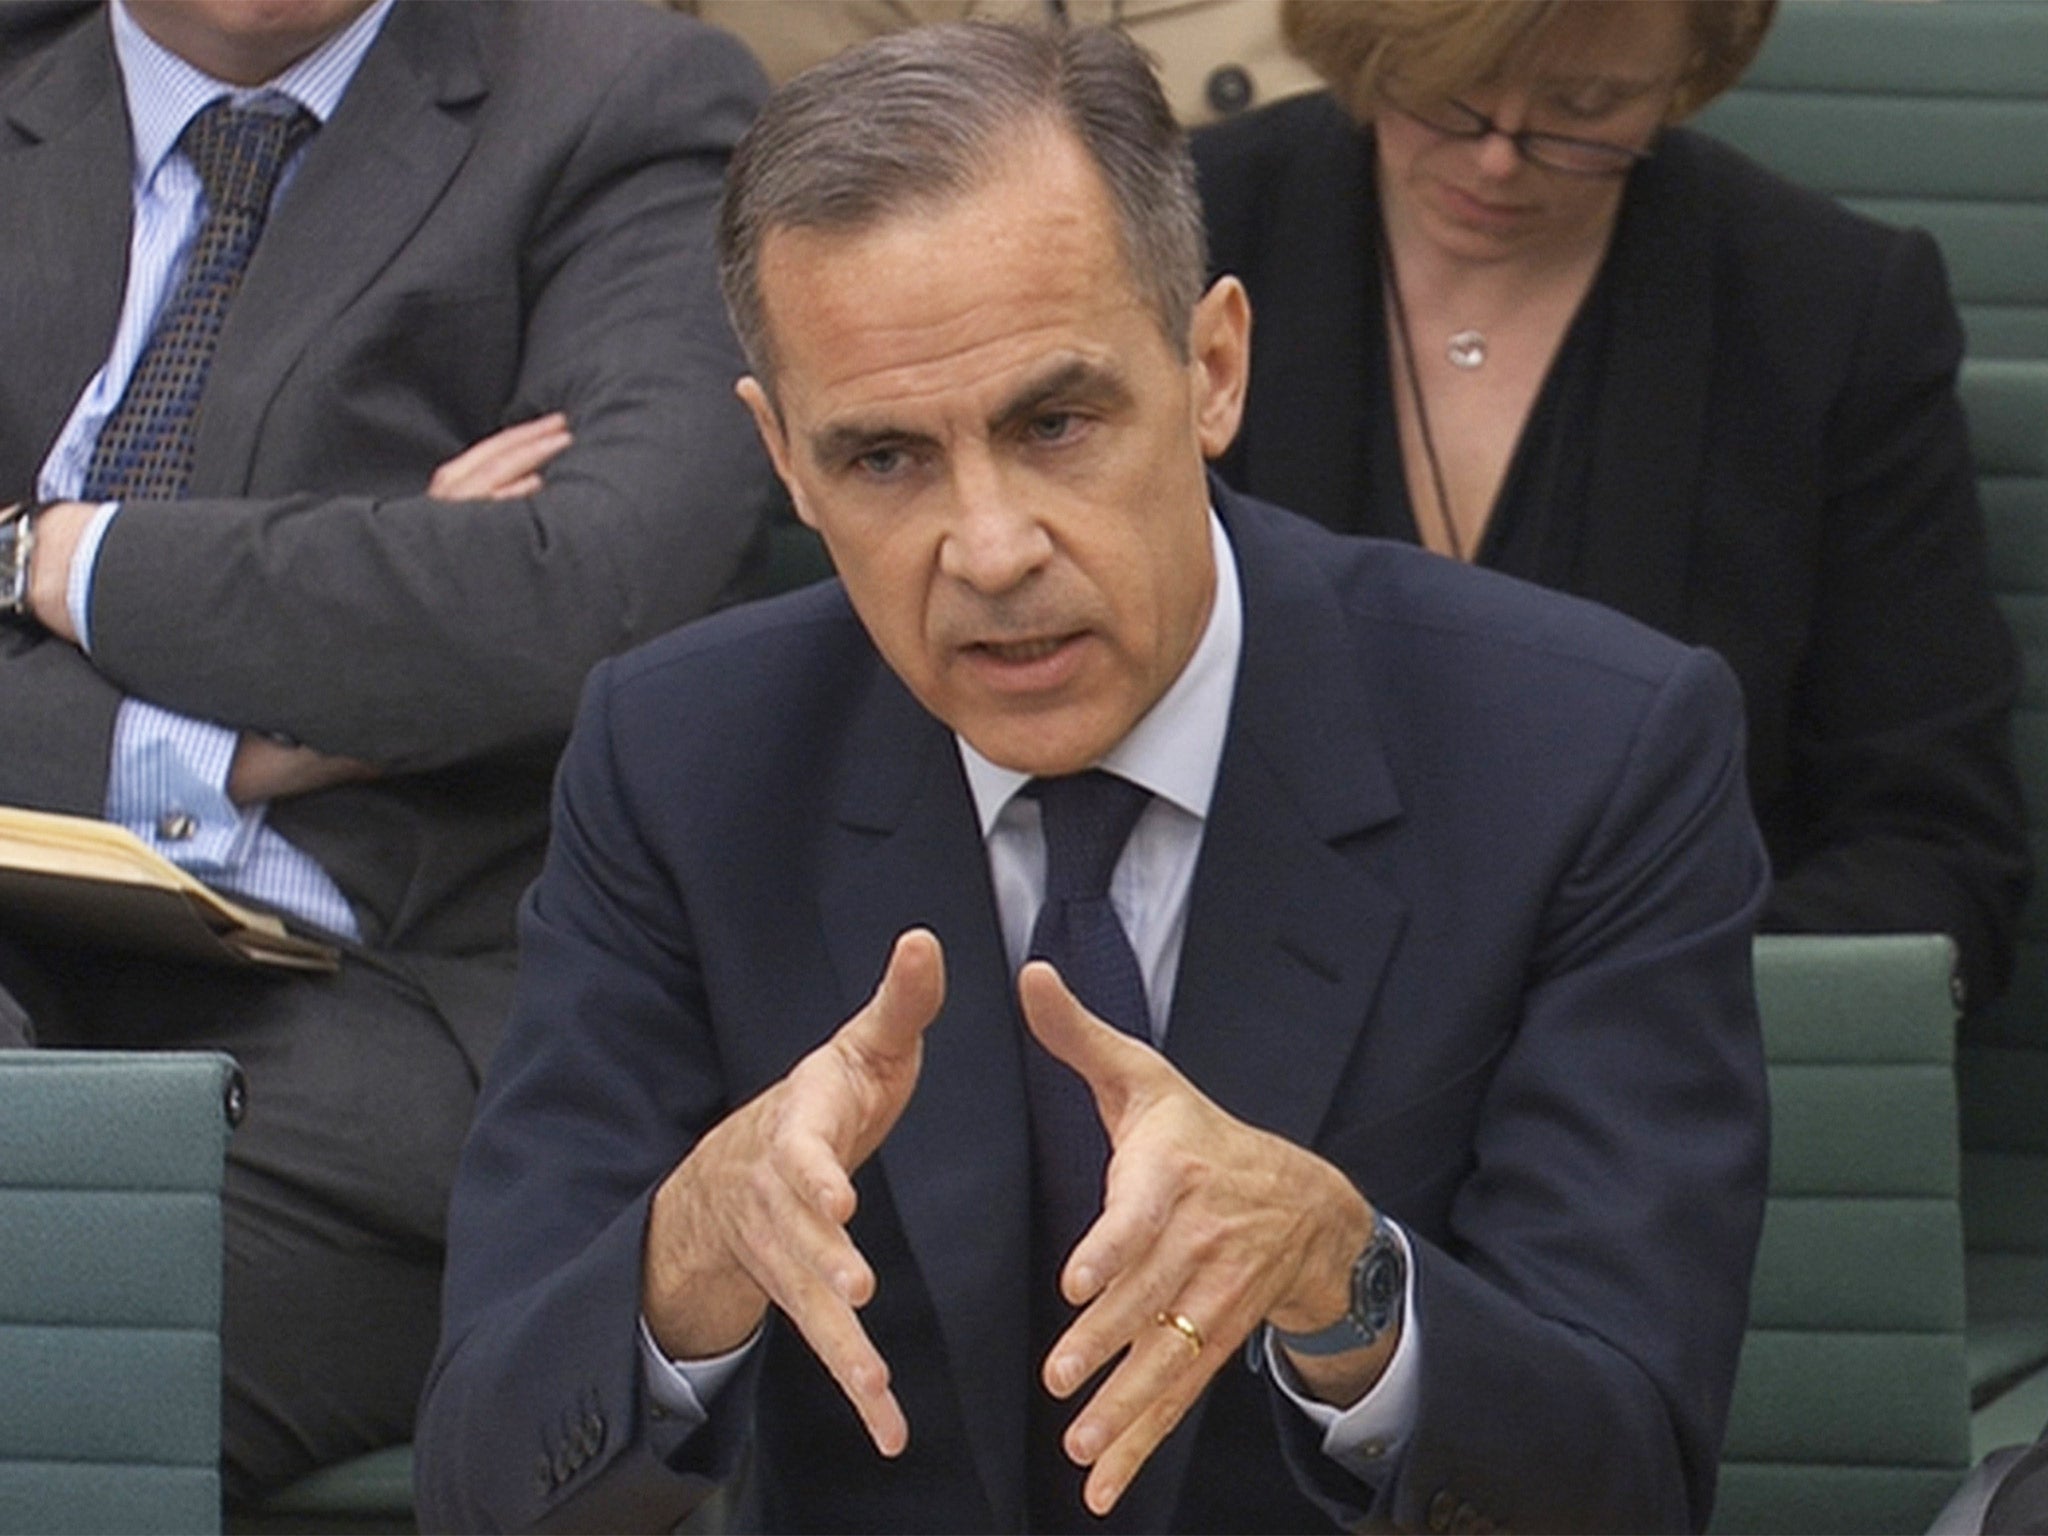 Mark Carney insisted he was reflecting the views of the City, not the Chancellor or Prime Minister